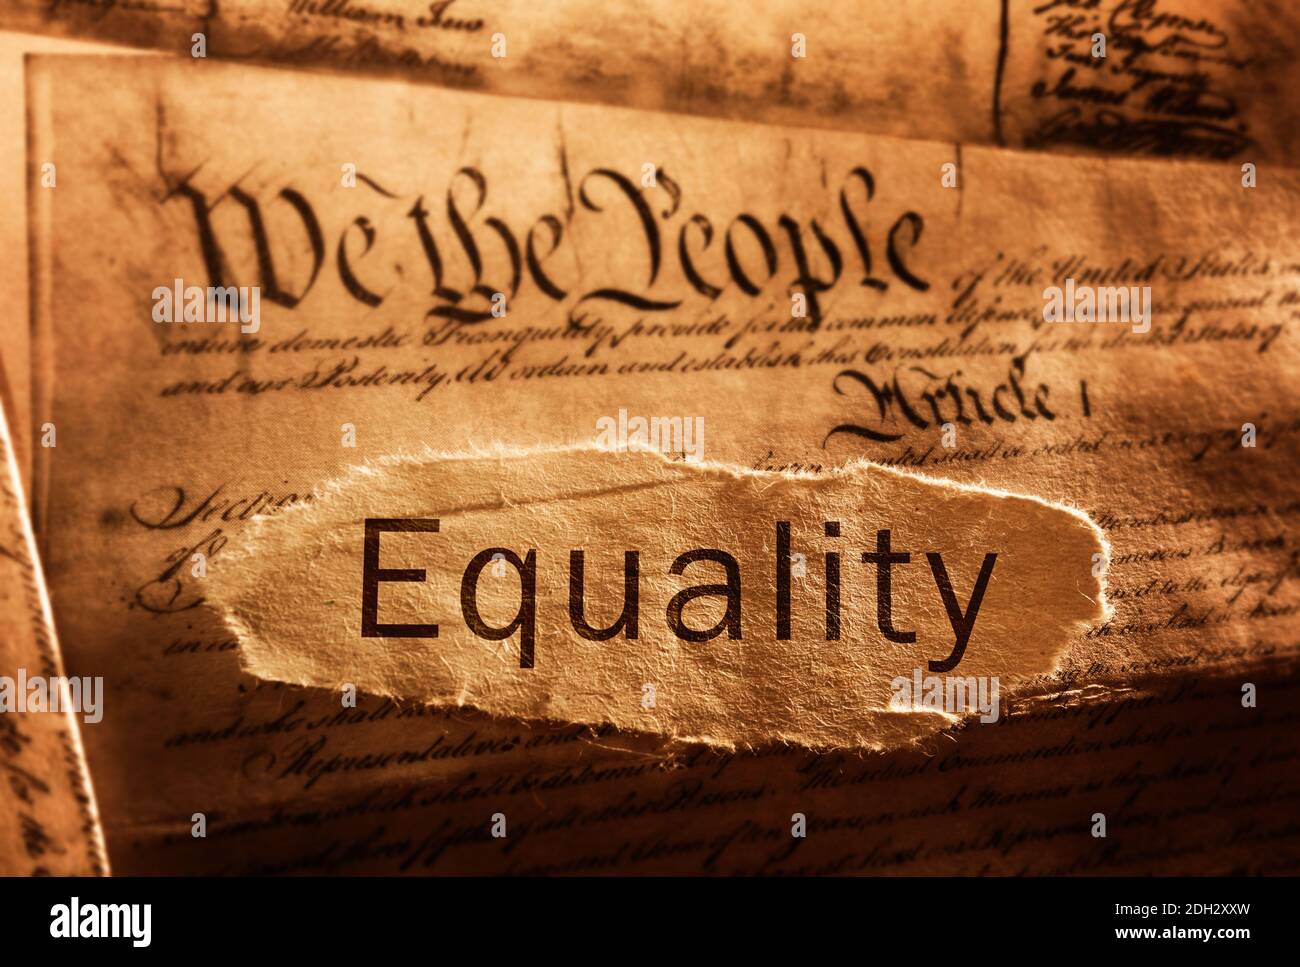 Equality news headline on US Constitution Stock Photo